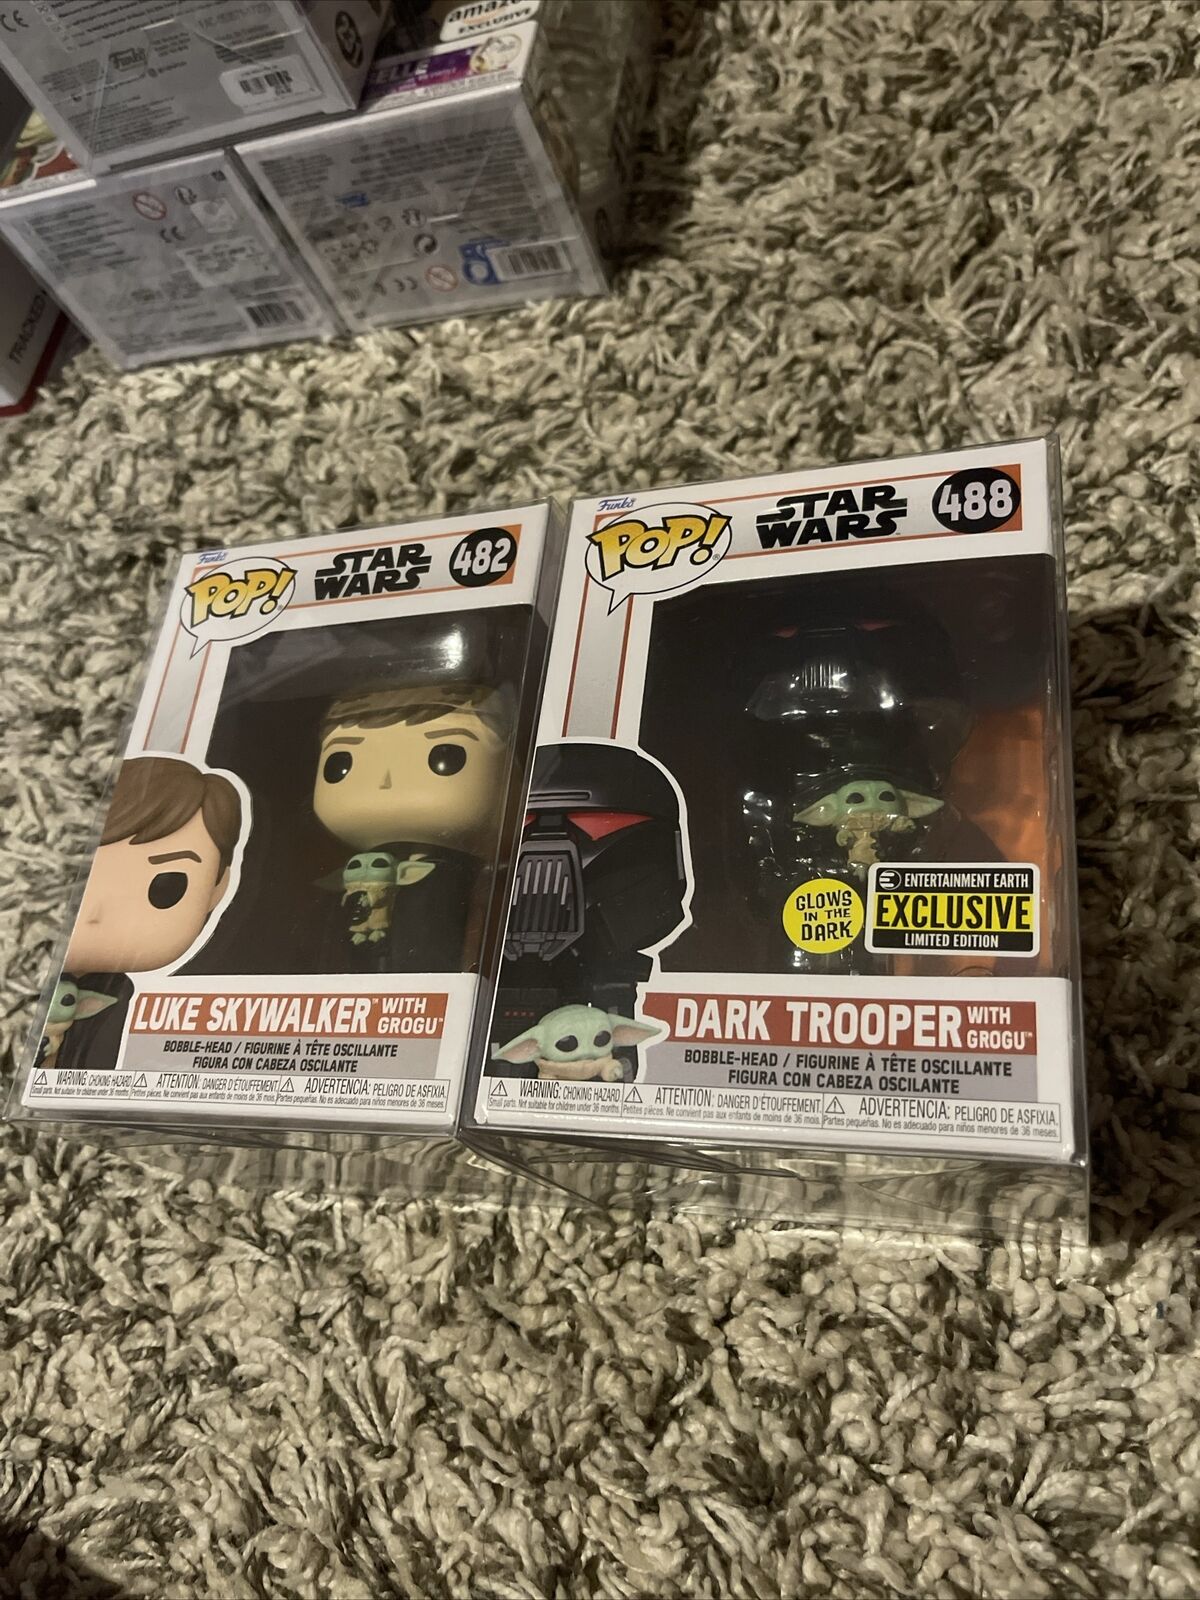 LOT OF 2 SRAT WARS POPS #482 and #488